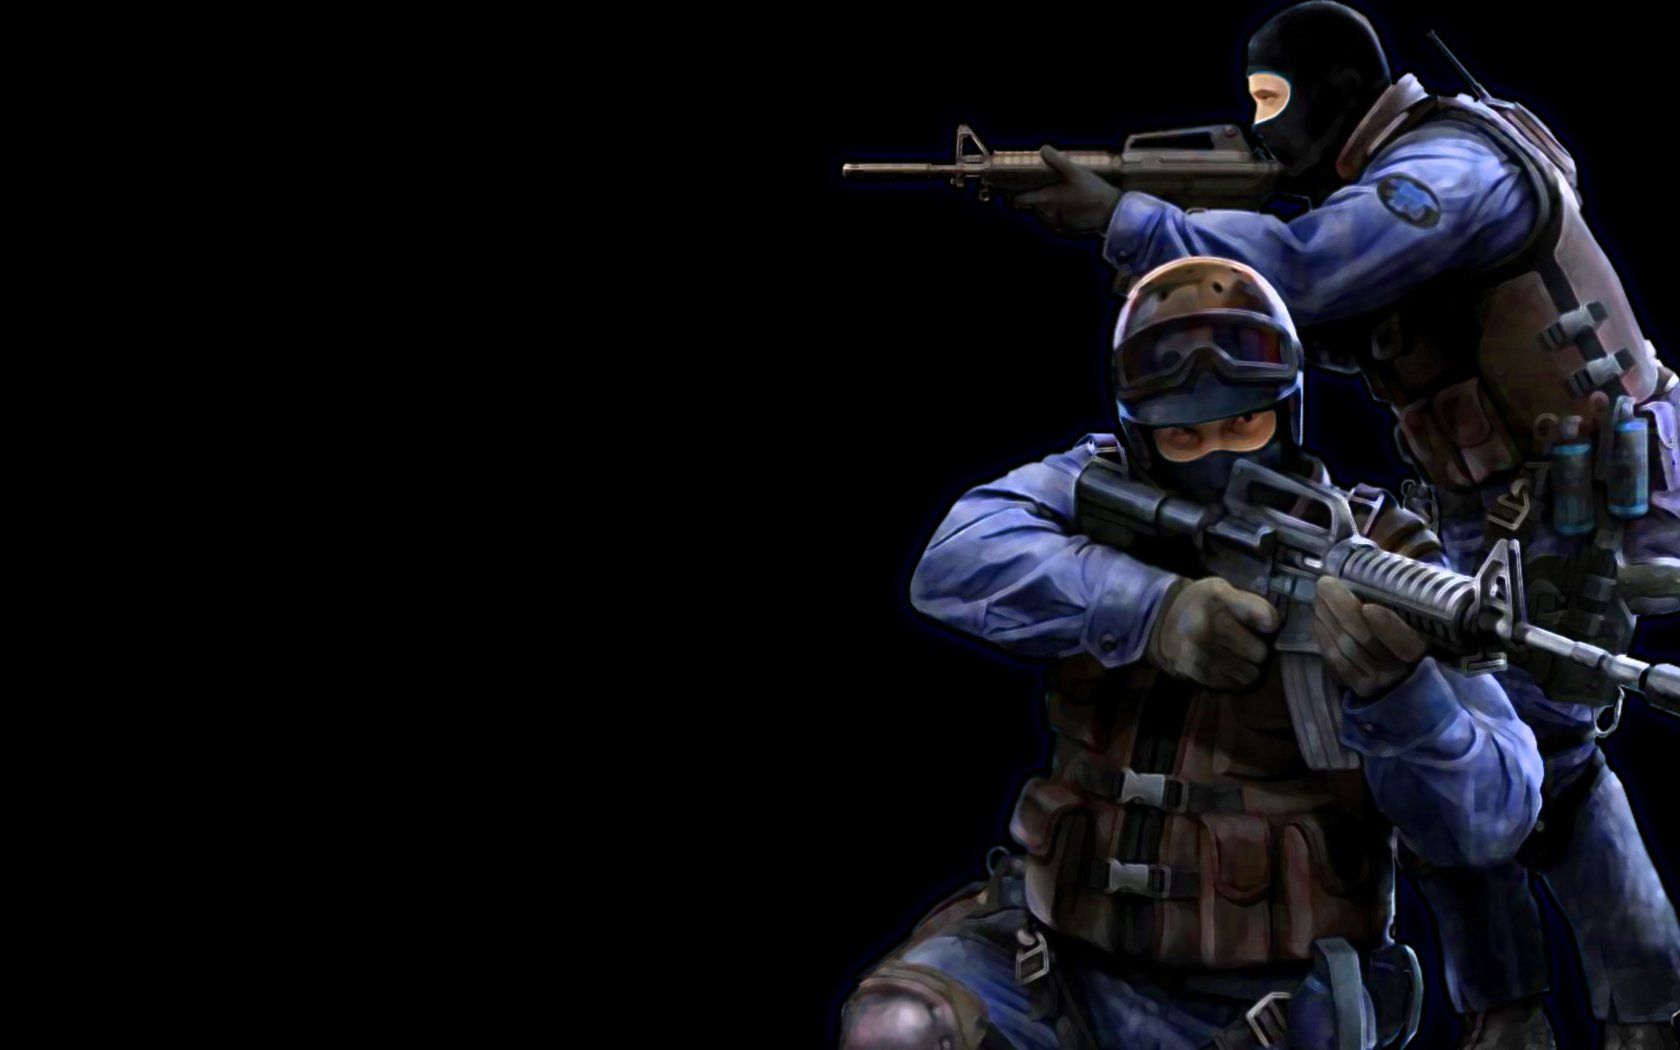 Counter Strike 1.6 Wallpapers